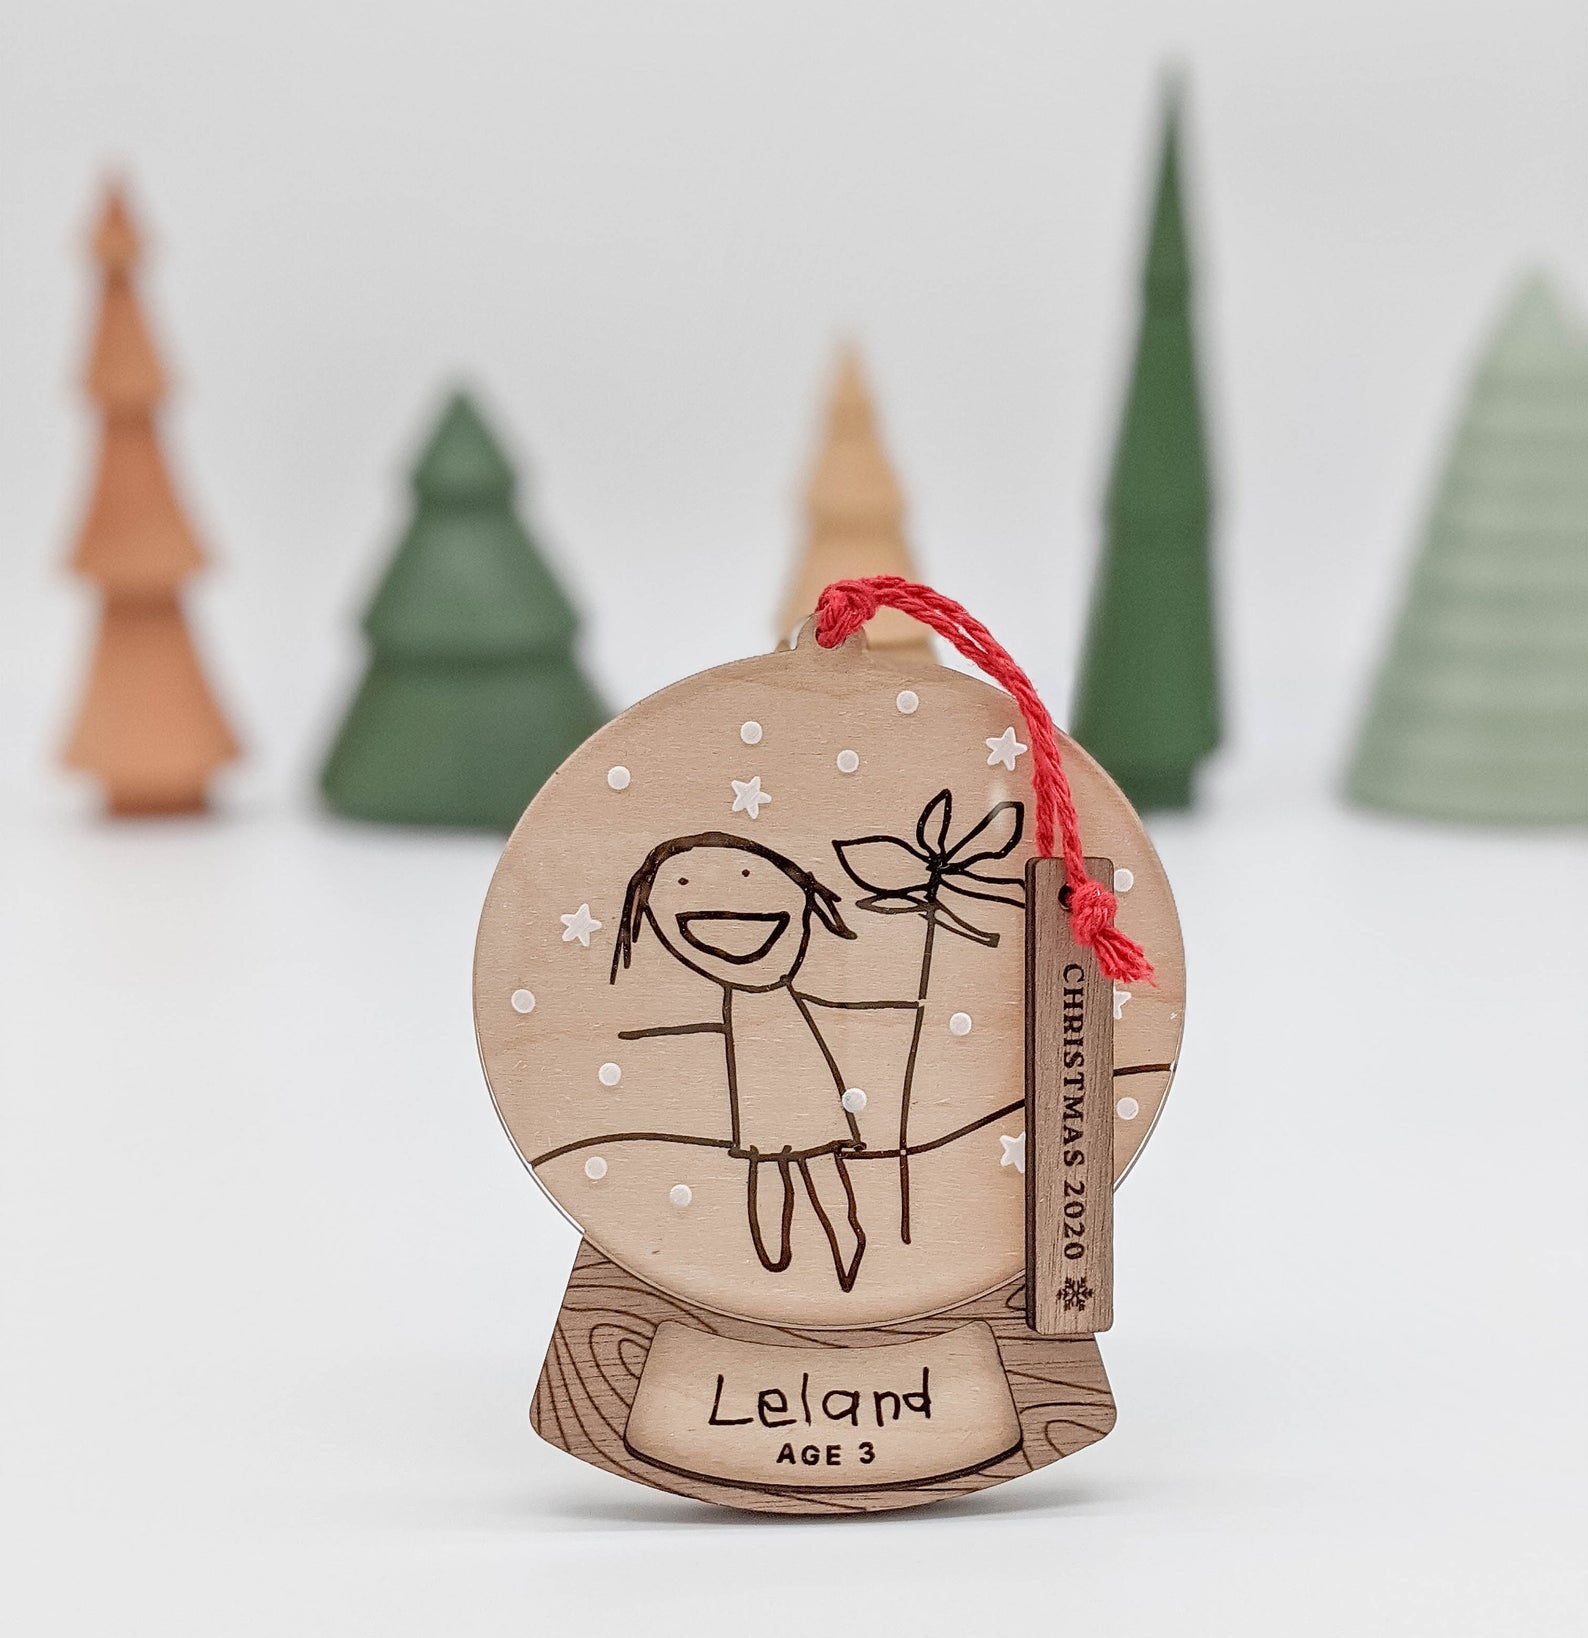 10 best gifts for grandparents from small businesses: A Child's Drawing turned into an Ornament 